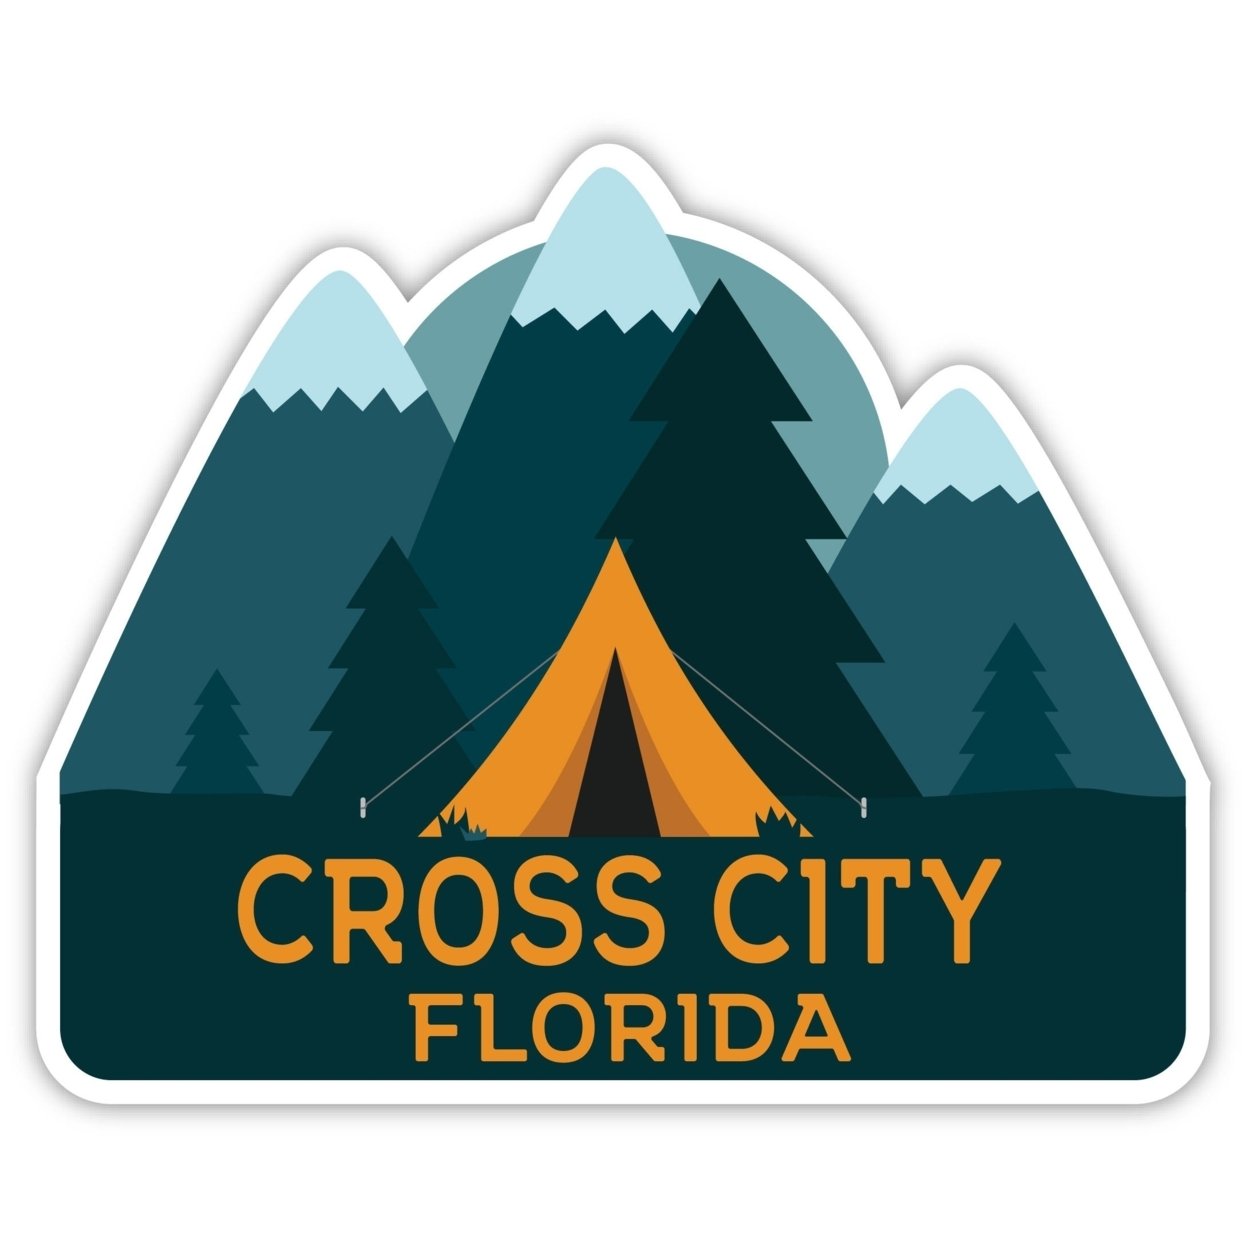 Cross City Florida Souvenir Decorative Stickers (Choose Theme And Size) - 4-Pack, 8-Inch, Tent